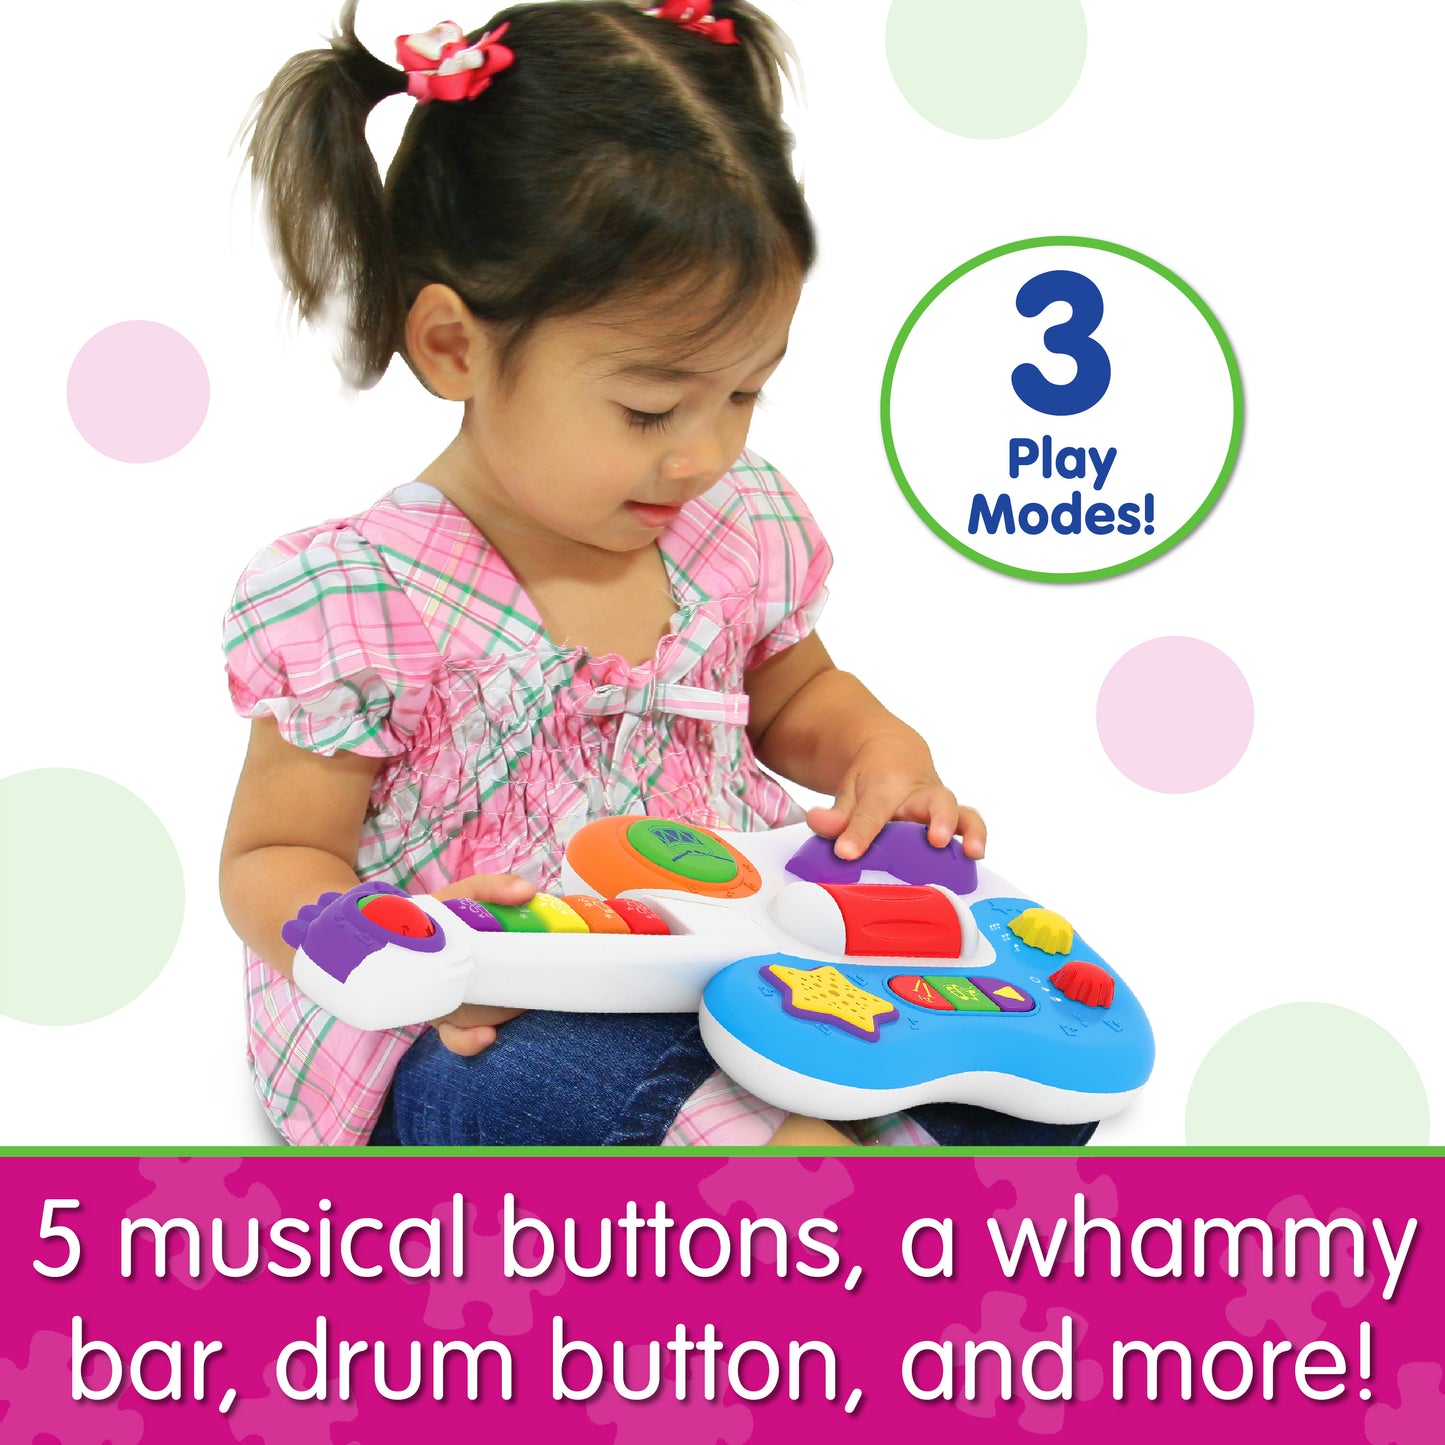 Infographic of little girl playing with Little Rock Star Guitar that says, "5 musical buttons, a whammy bar, drum button, and more!"